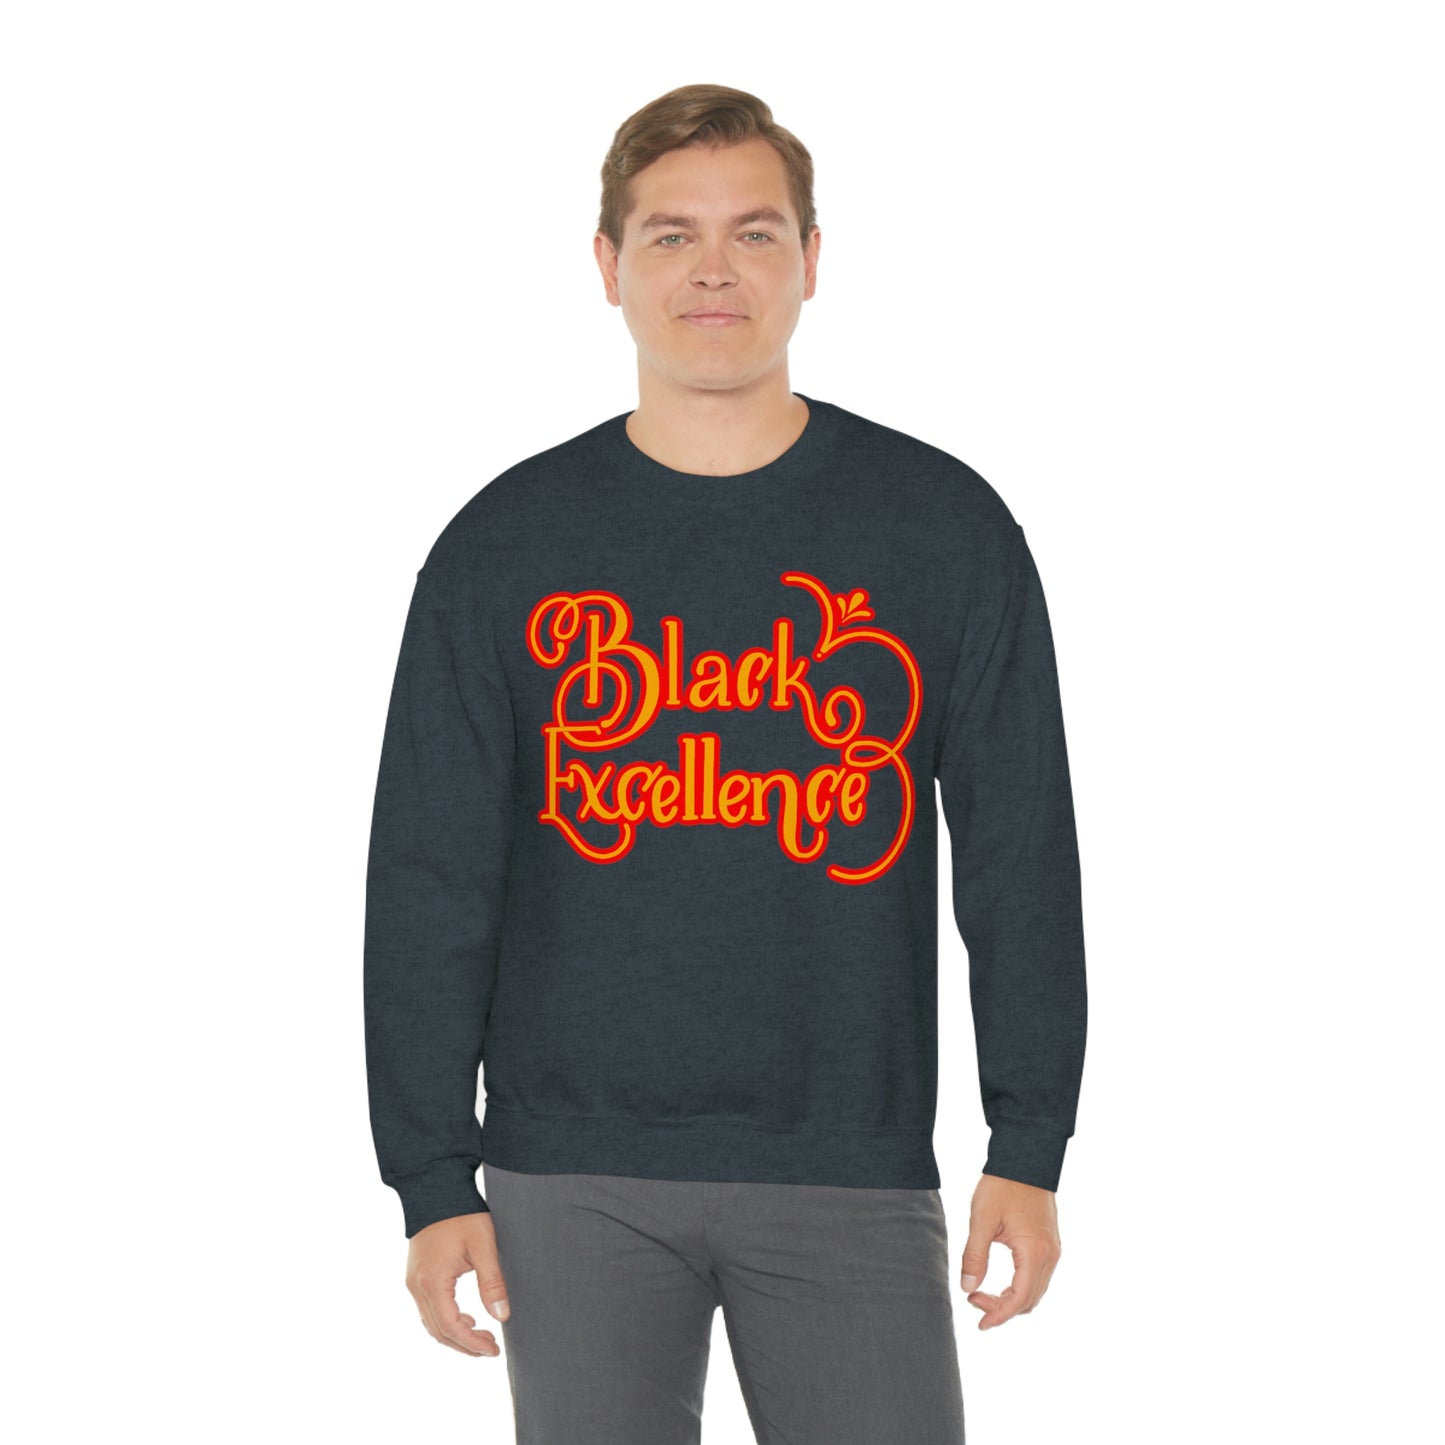 Limited Edition Black Excellence Sweatshirt